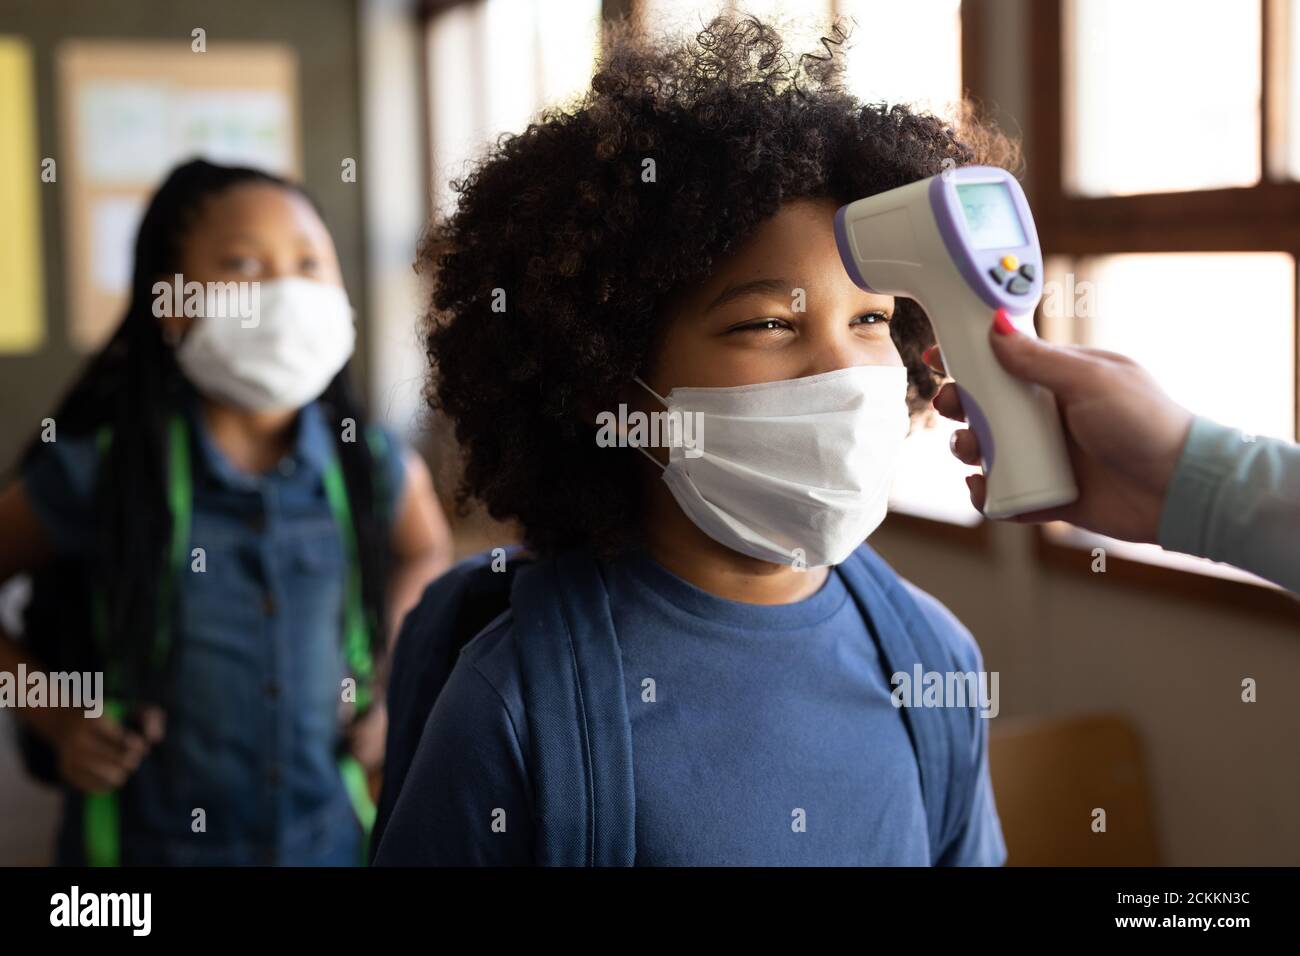 Boy wearing face mask getting his temperature measured in class at school Stock Photo